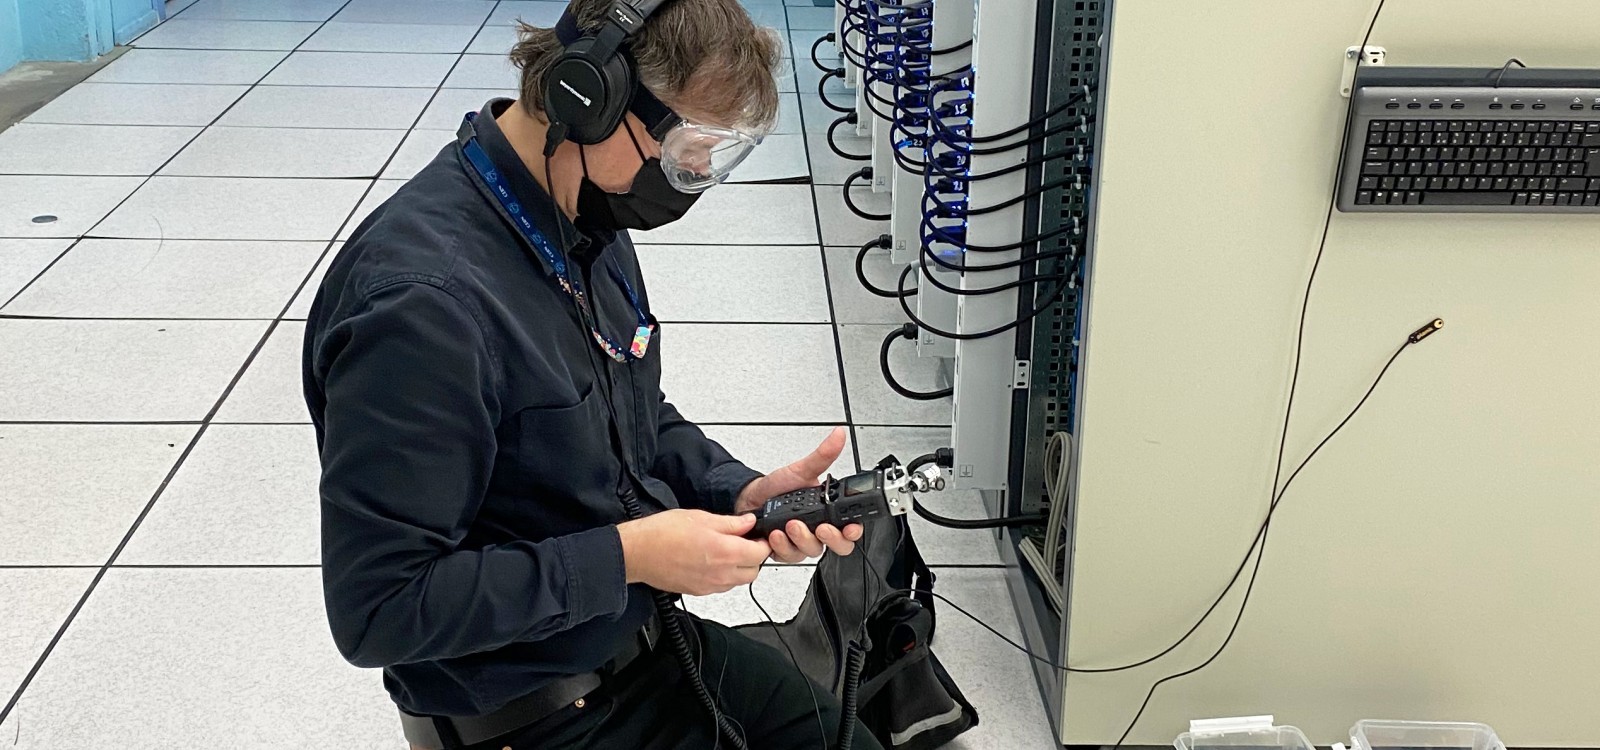 Erich Berger doing sound recording at CERN's Data Centre